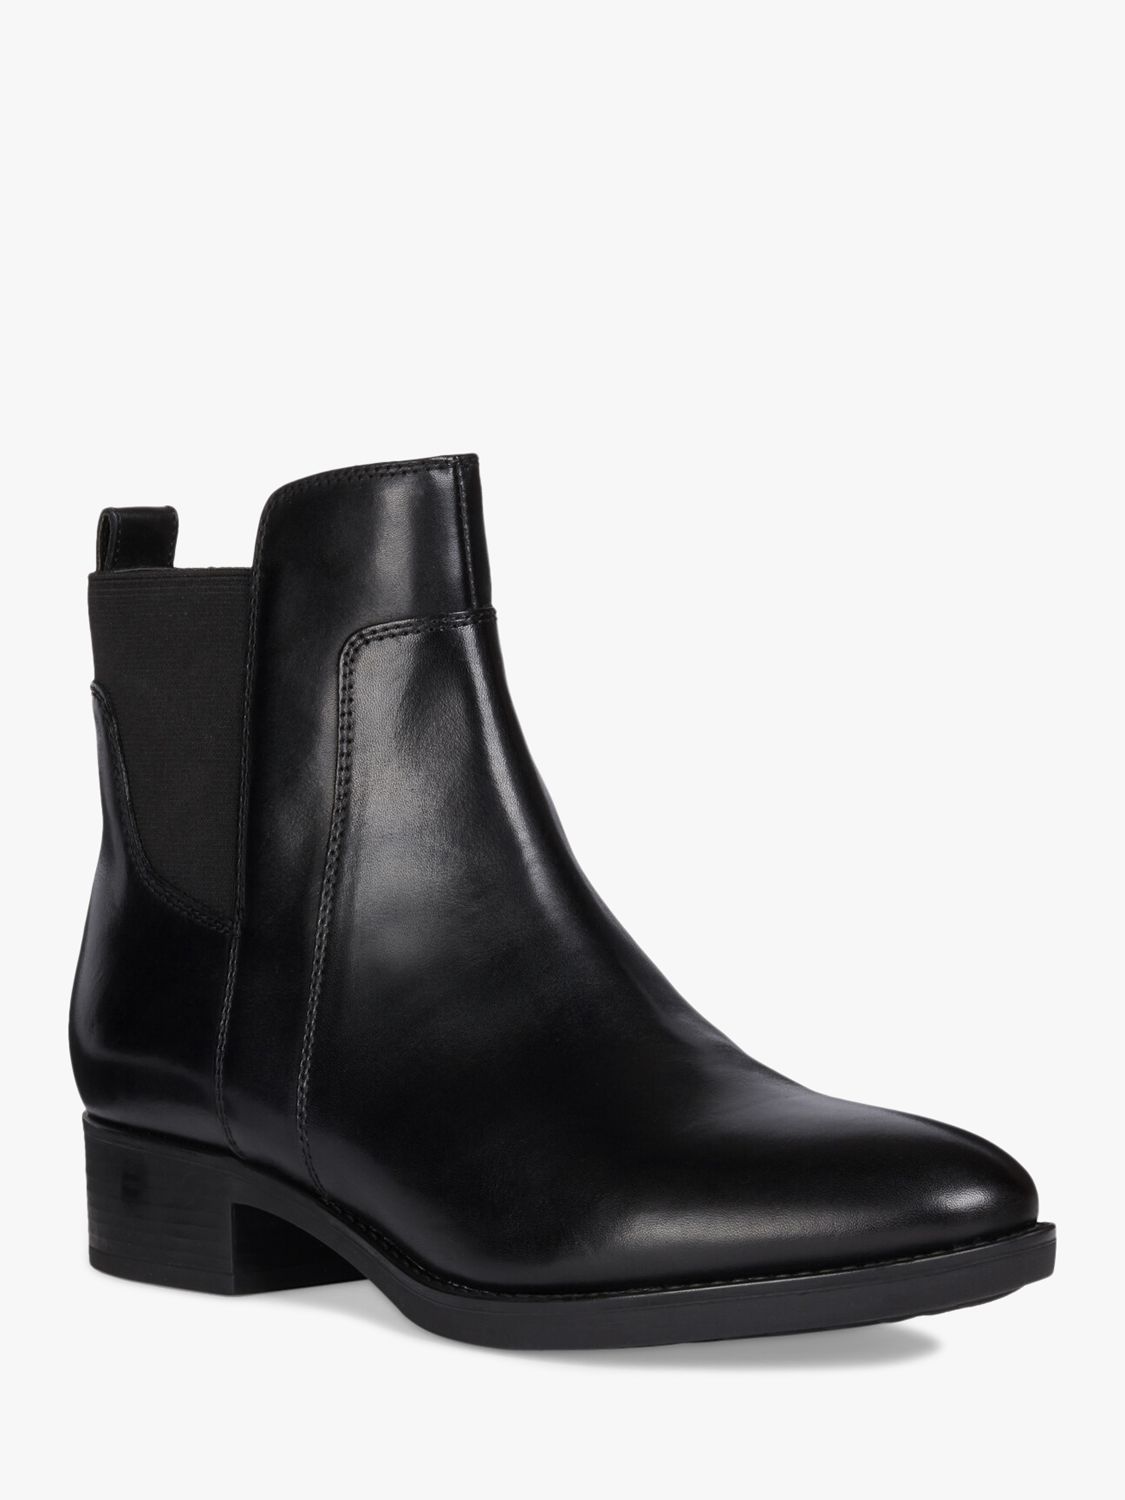 Geox Women's Felicity Leather Heeled Ankle Boots, Black at John Lewis ...